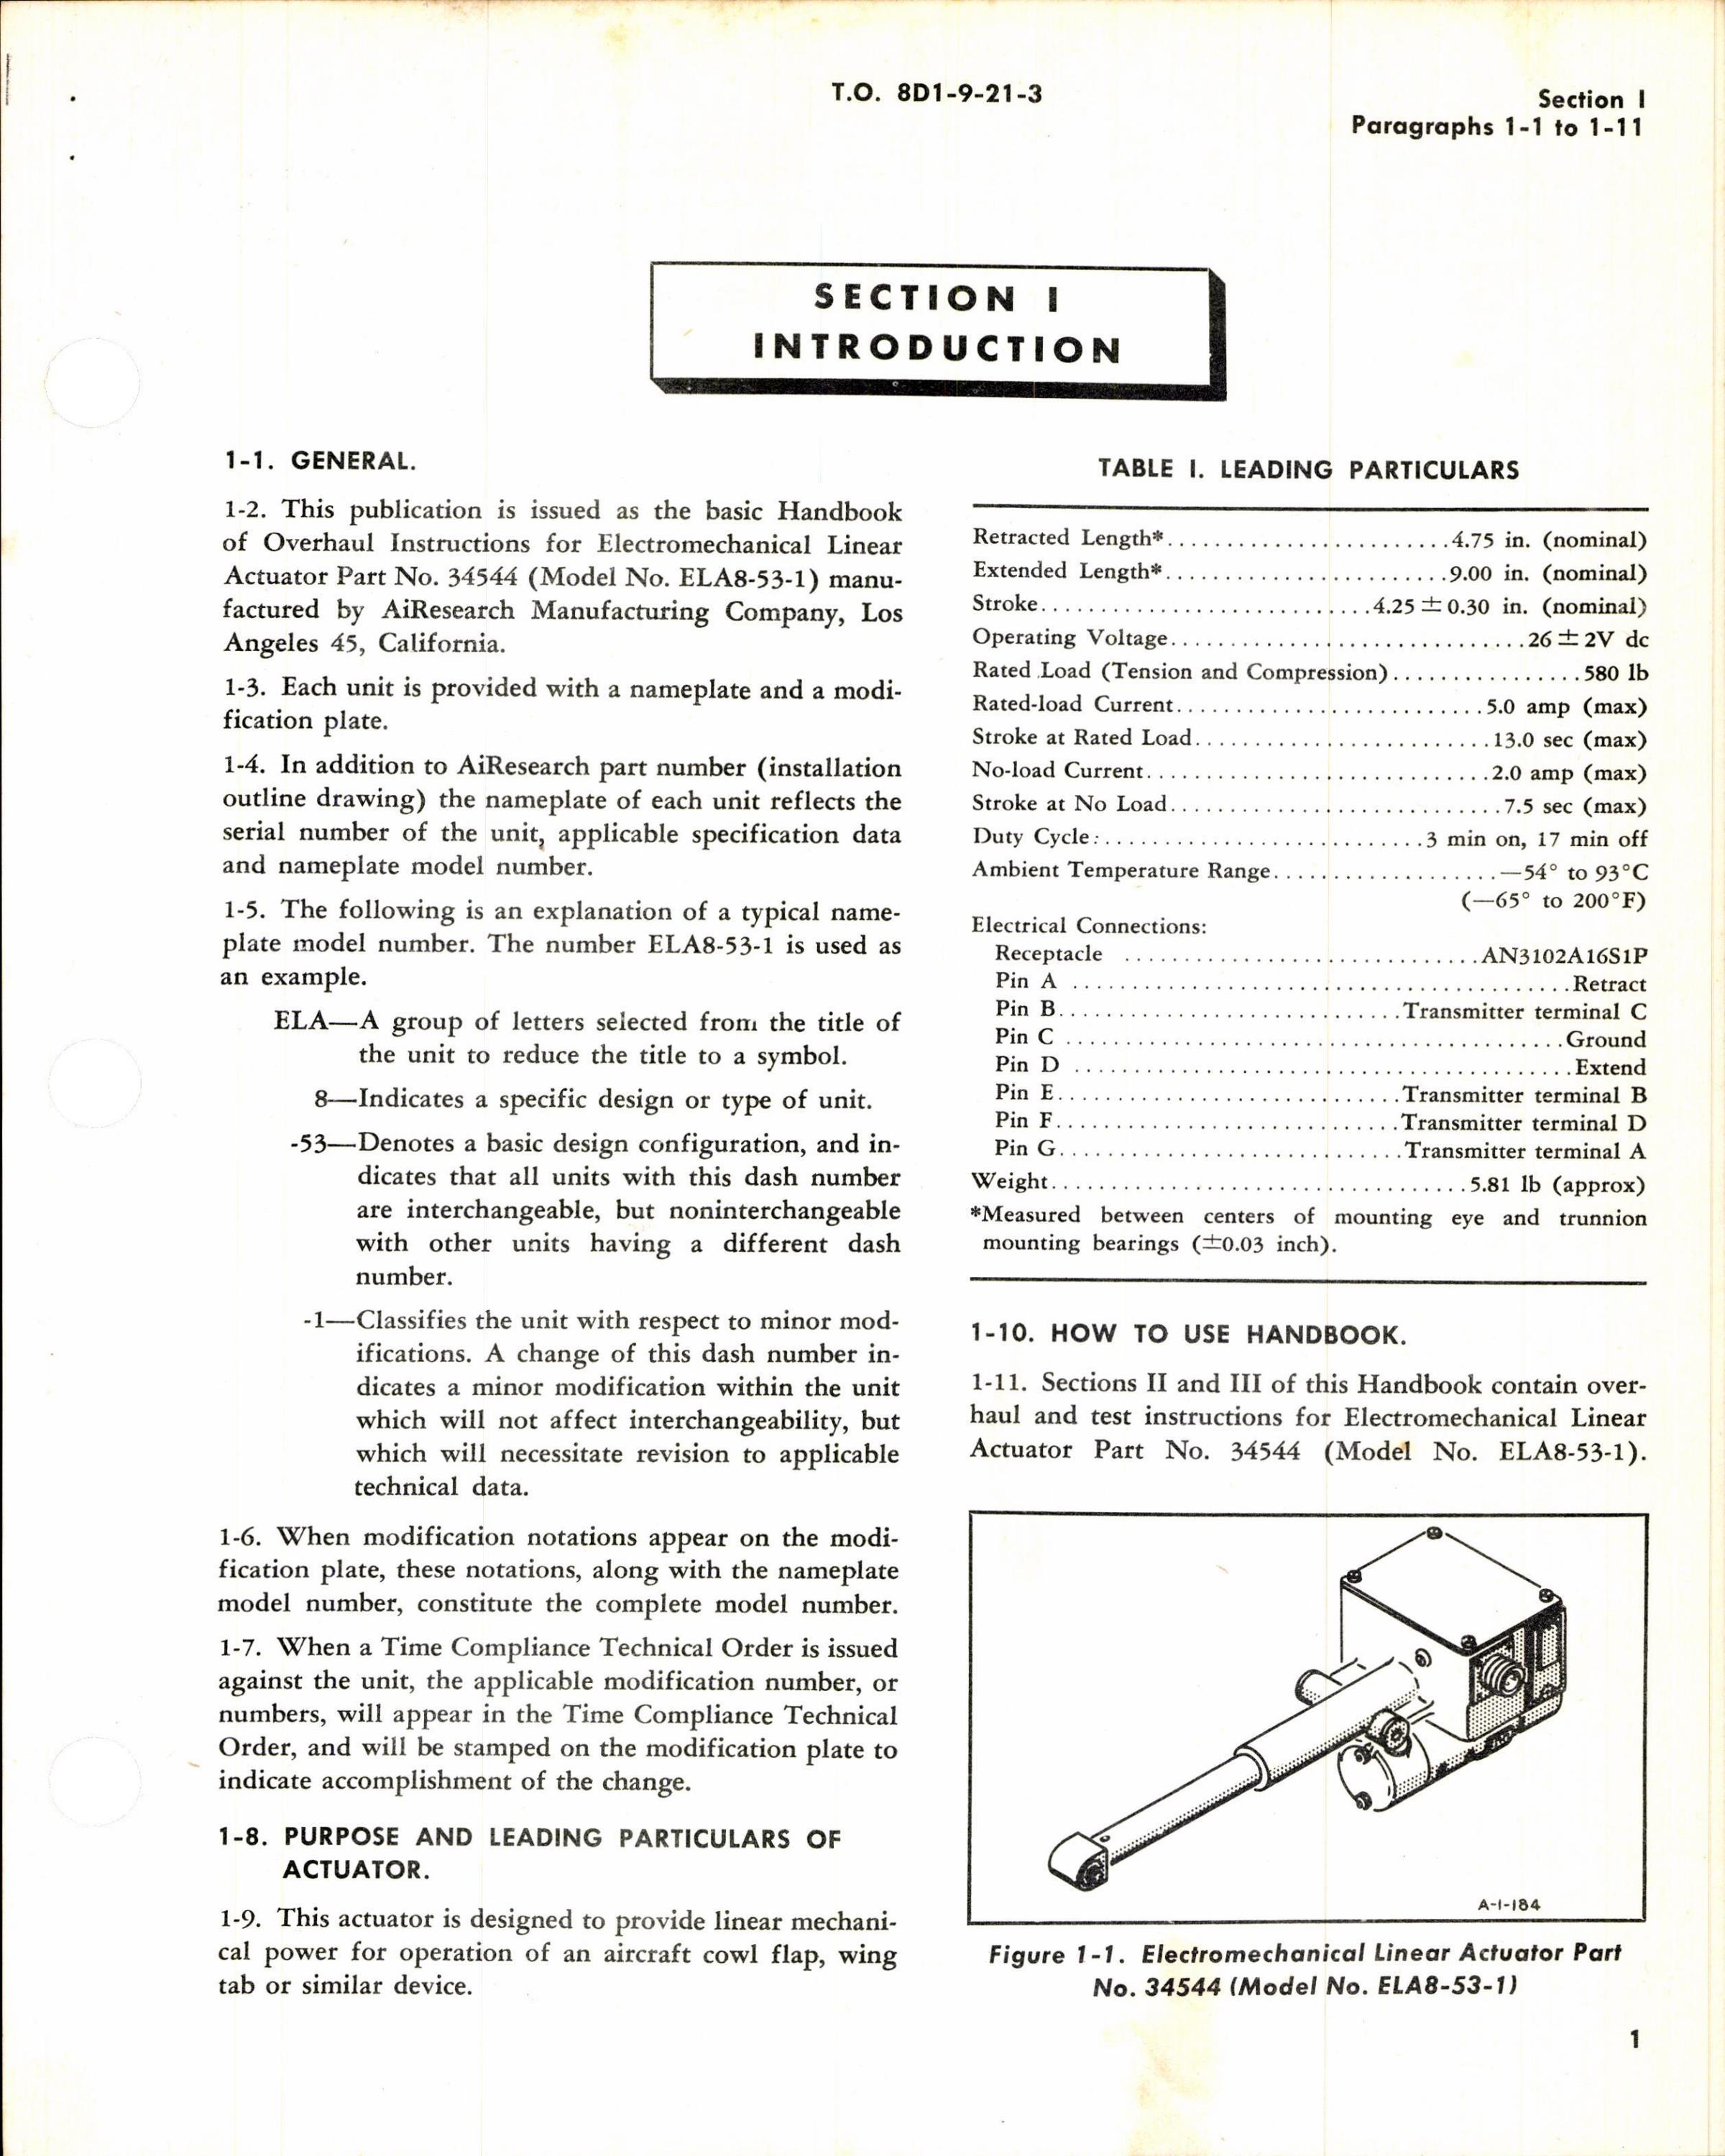 Sample page 3 from AirCorps Library document: Overhaul Instructions Electromechanical Linear Actuator